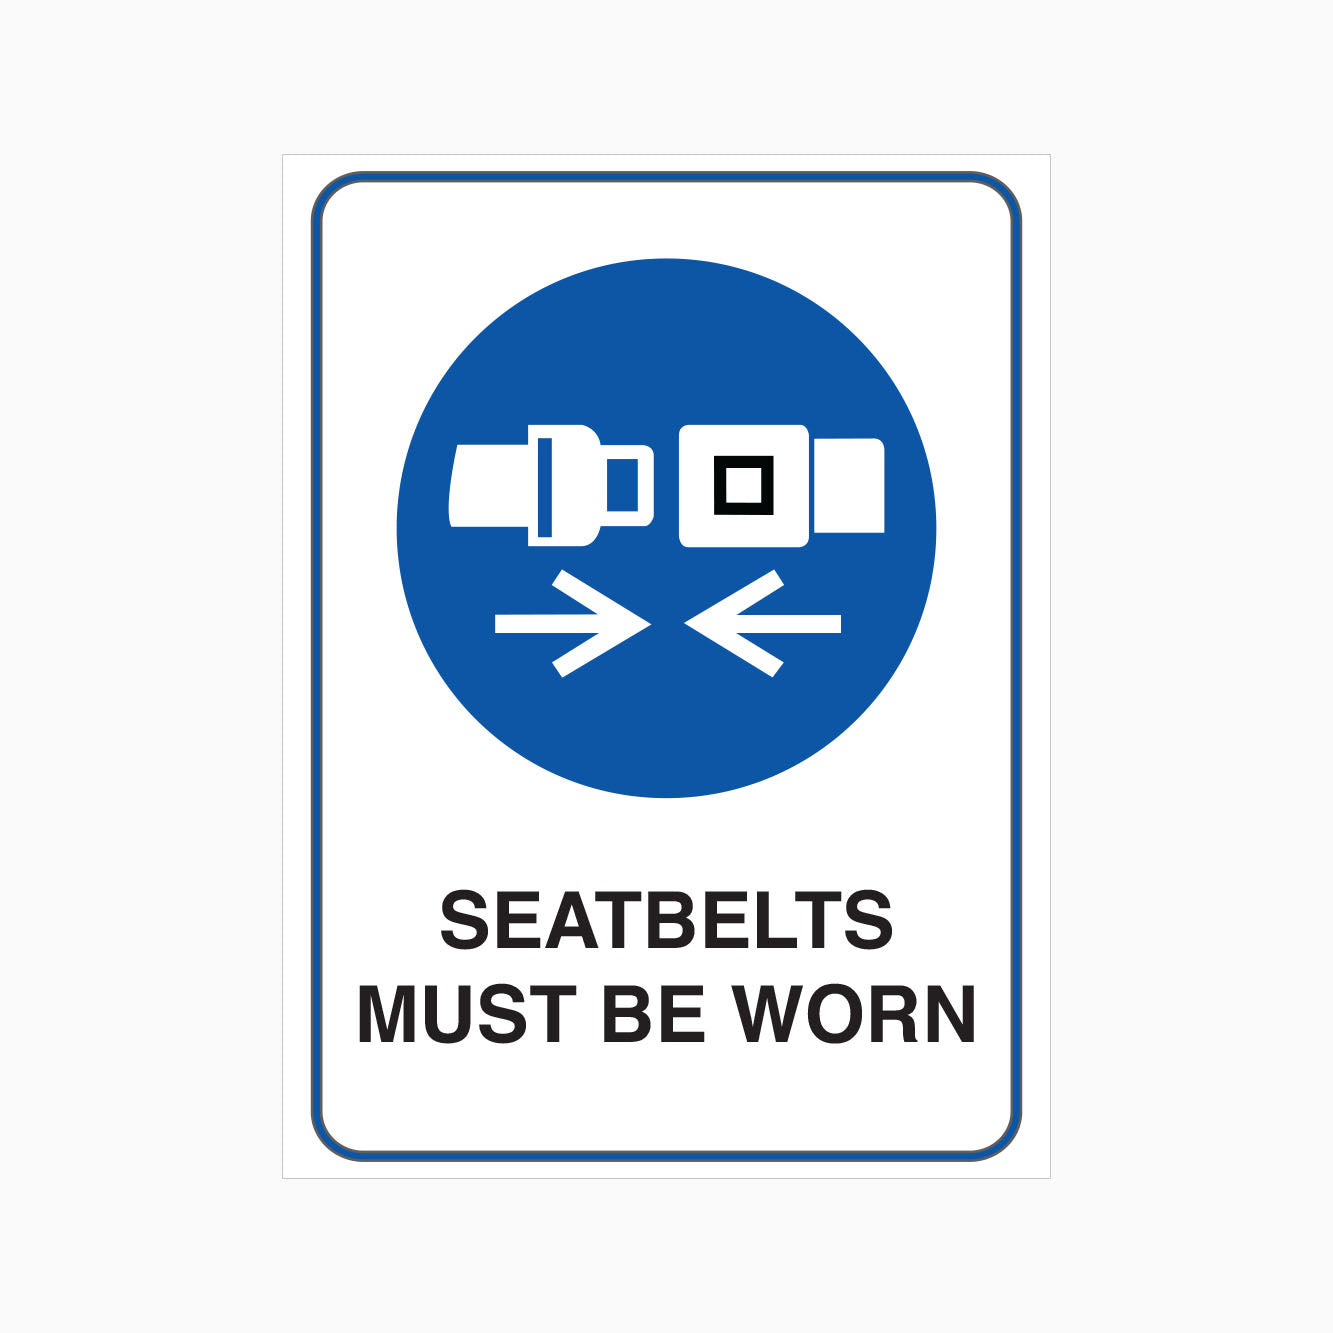 SEATBELTS MUST BE WORN SIGN - GET SIGNS